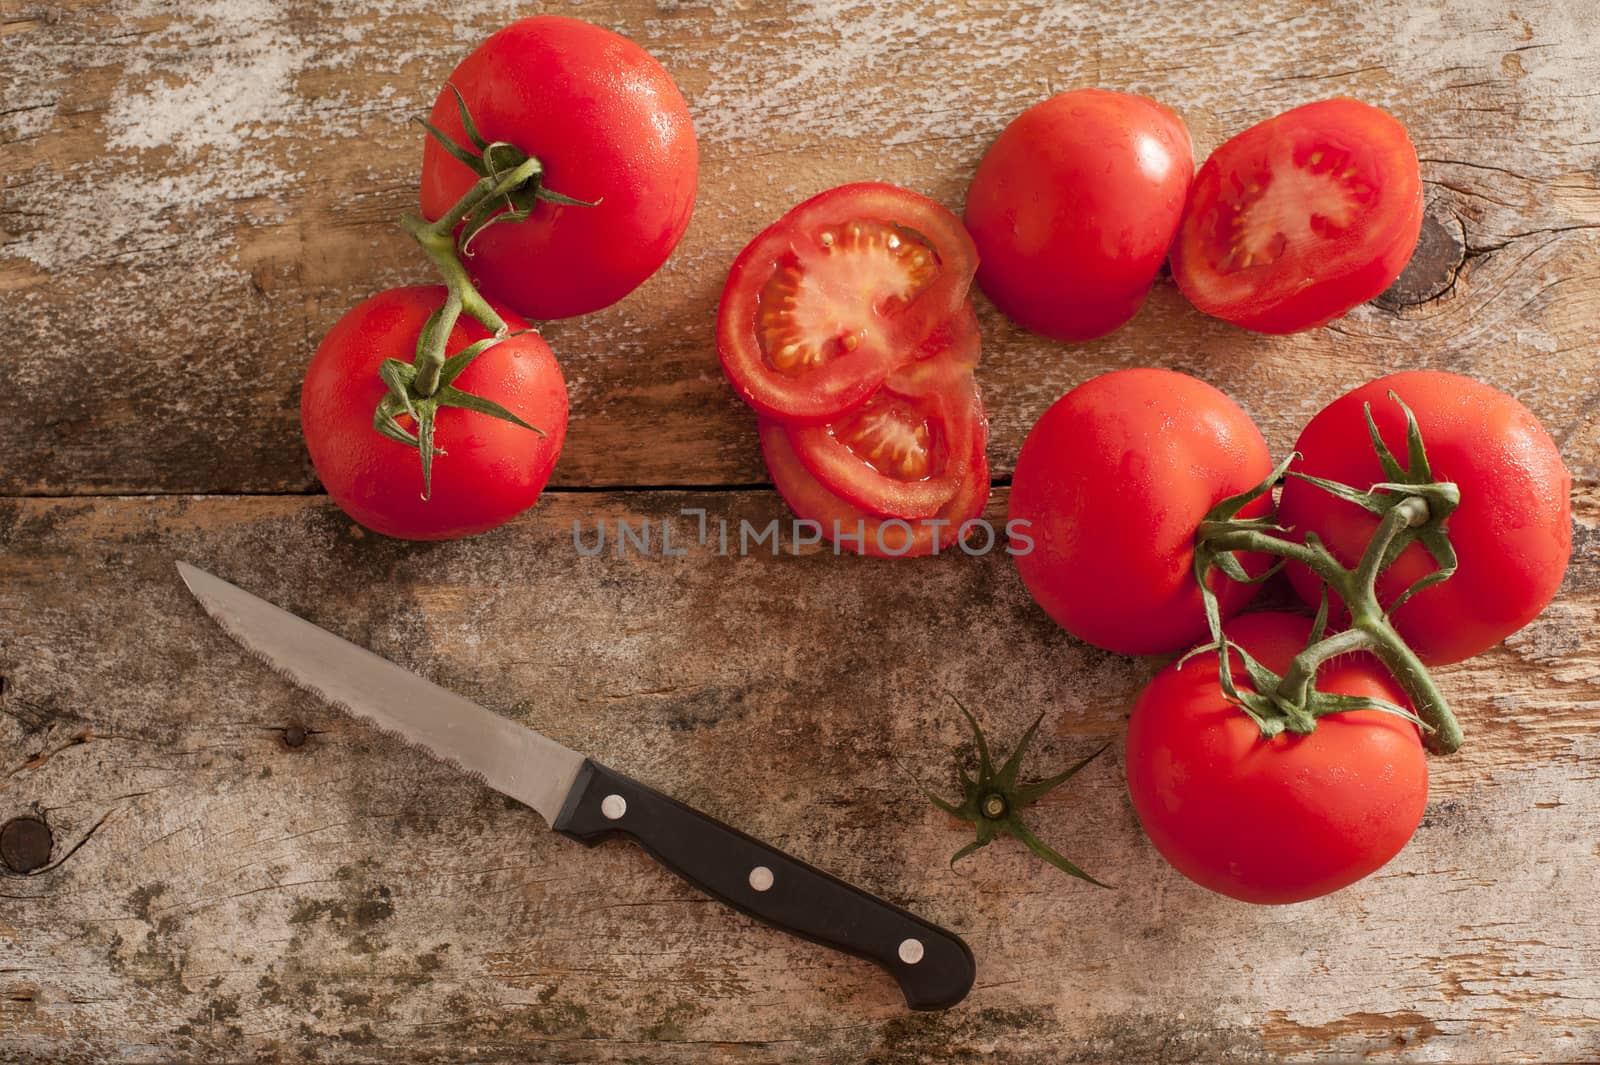 Preparing fresh tomatoes for a salad or cooking by stockarch